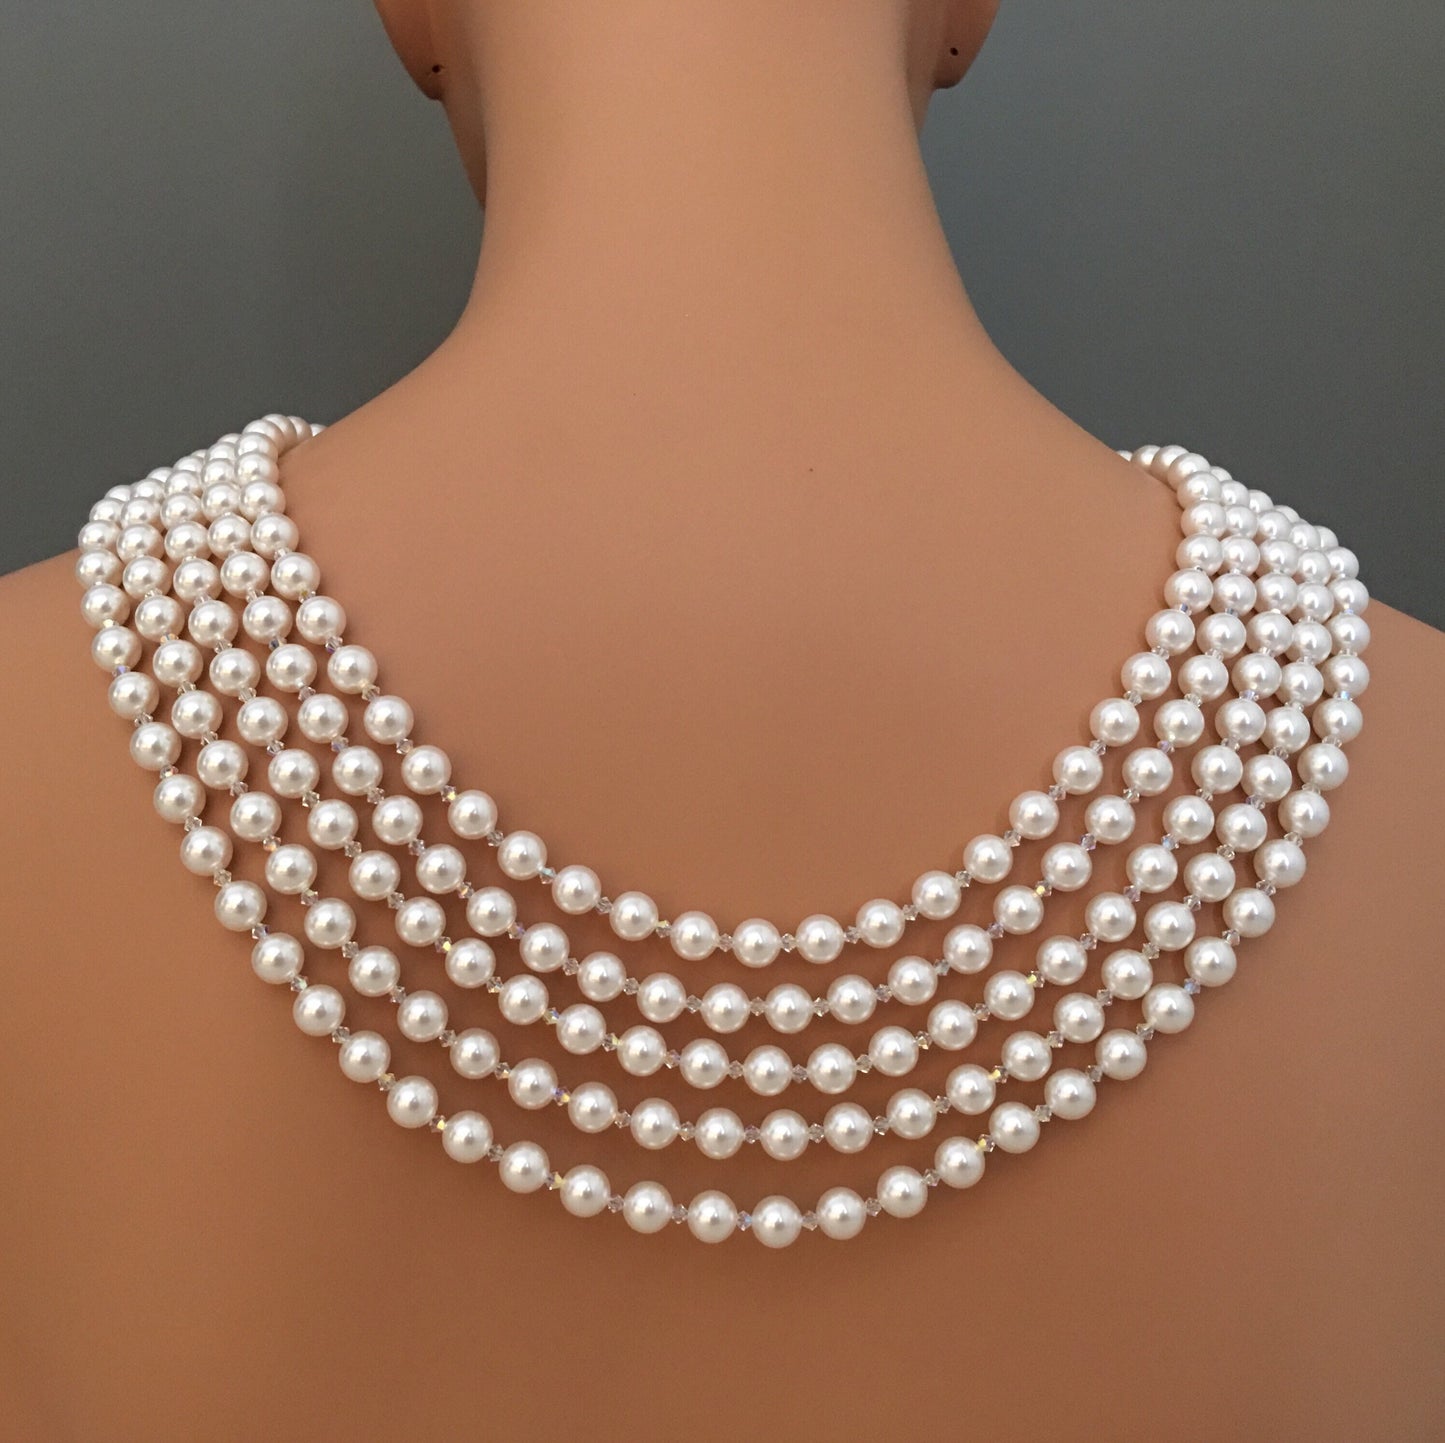 Audrey Hepburn style Necklace replica pearl necklace with brooch 5 multi strands Swarovski Pearls backdrop back drape Holly Golightly bridal